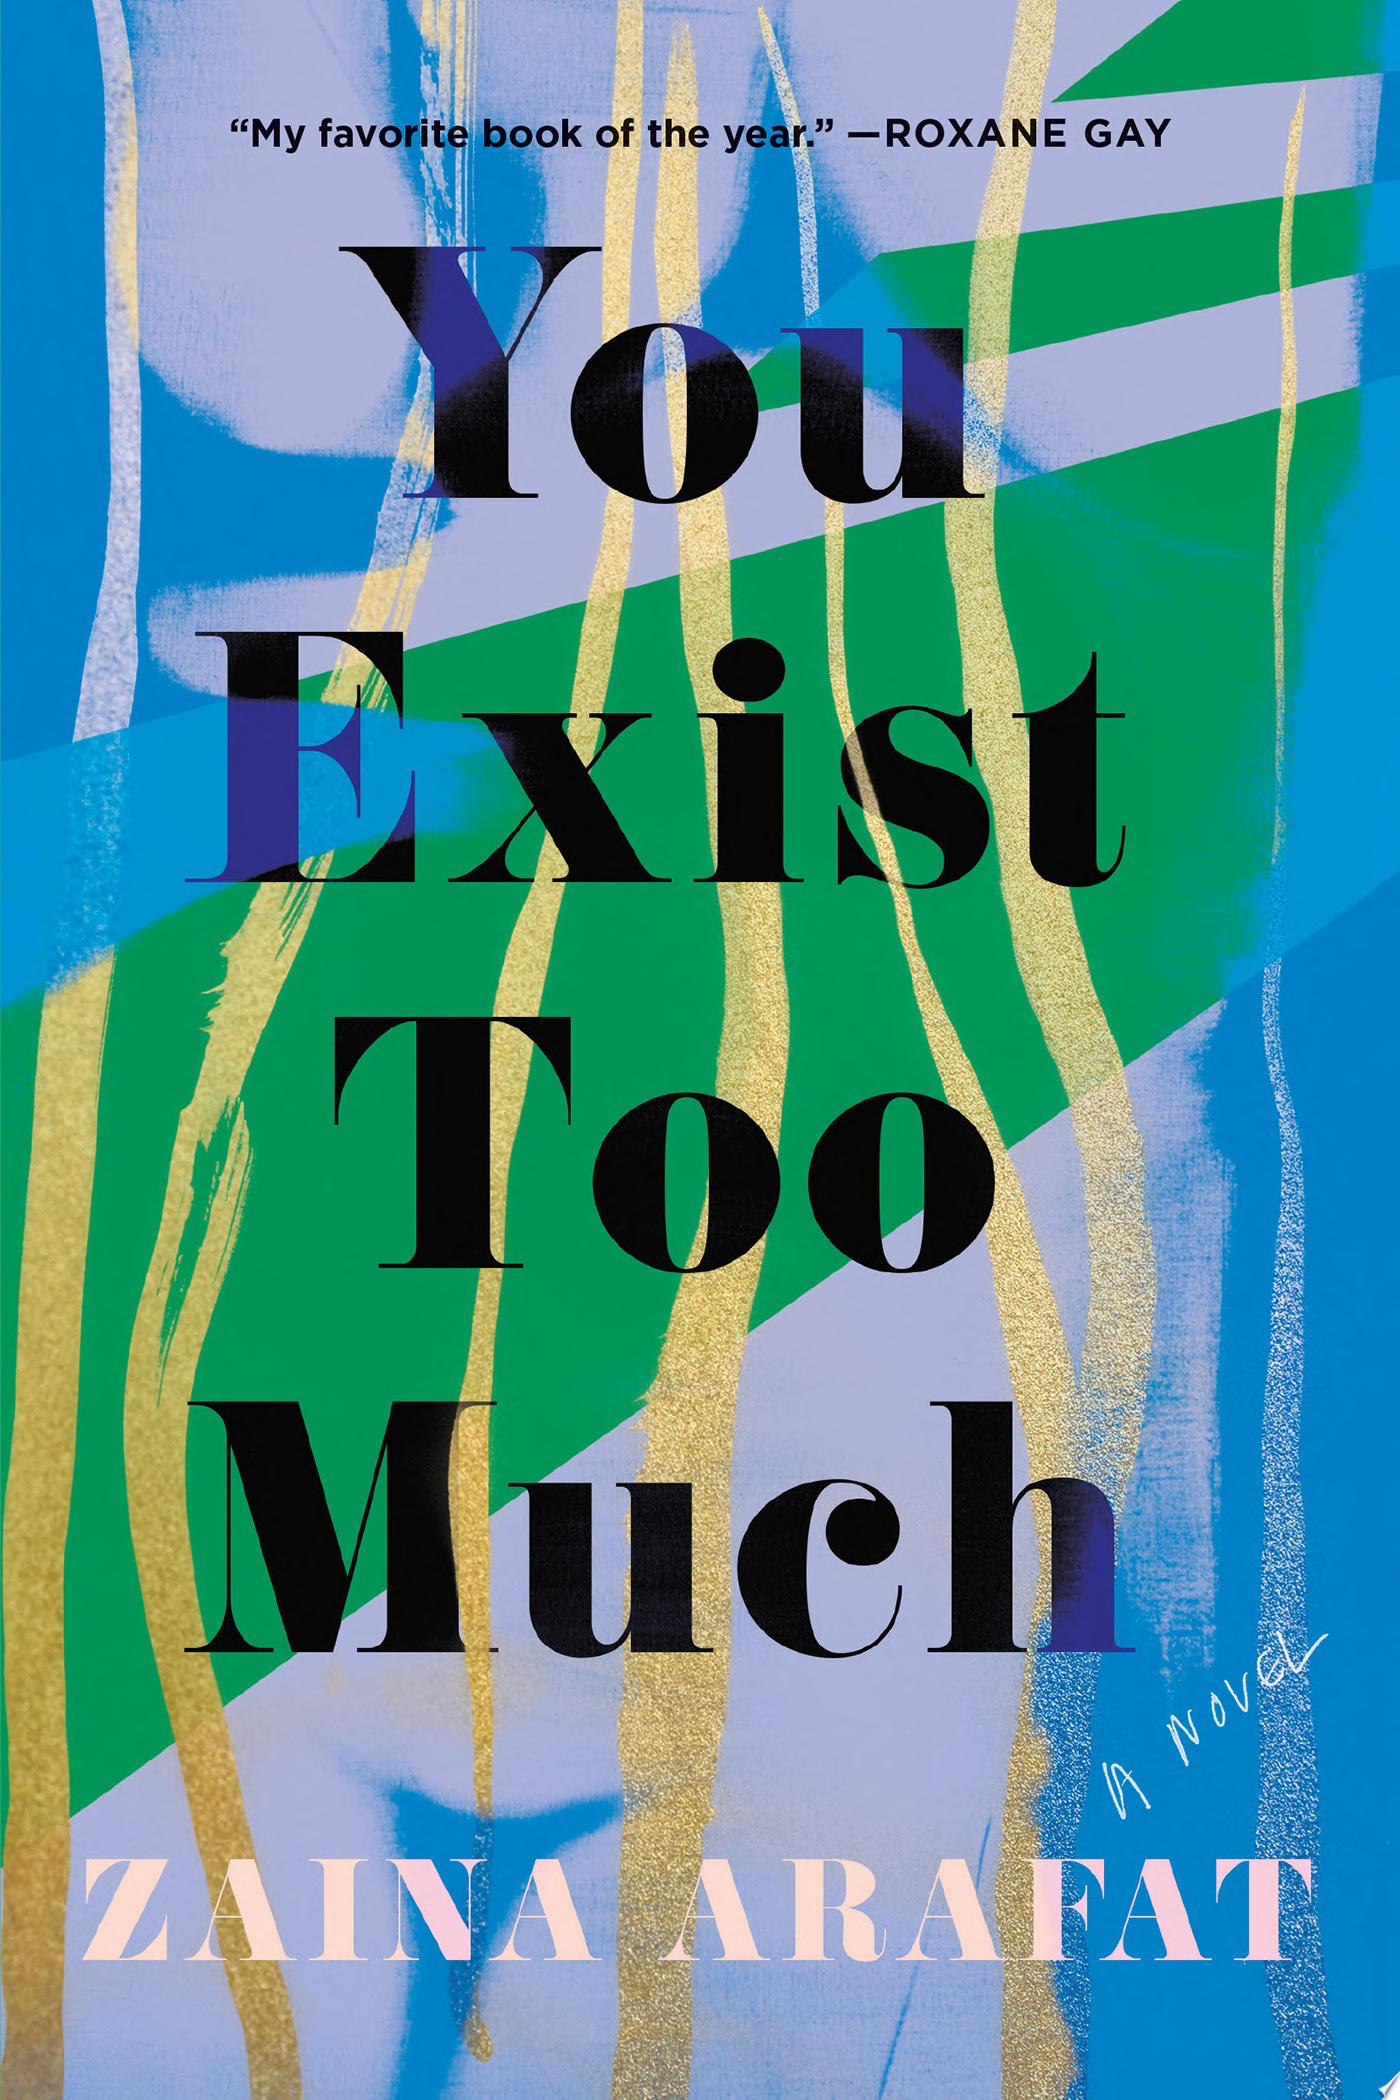 Image for "You Exist Too Much"